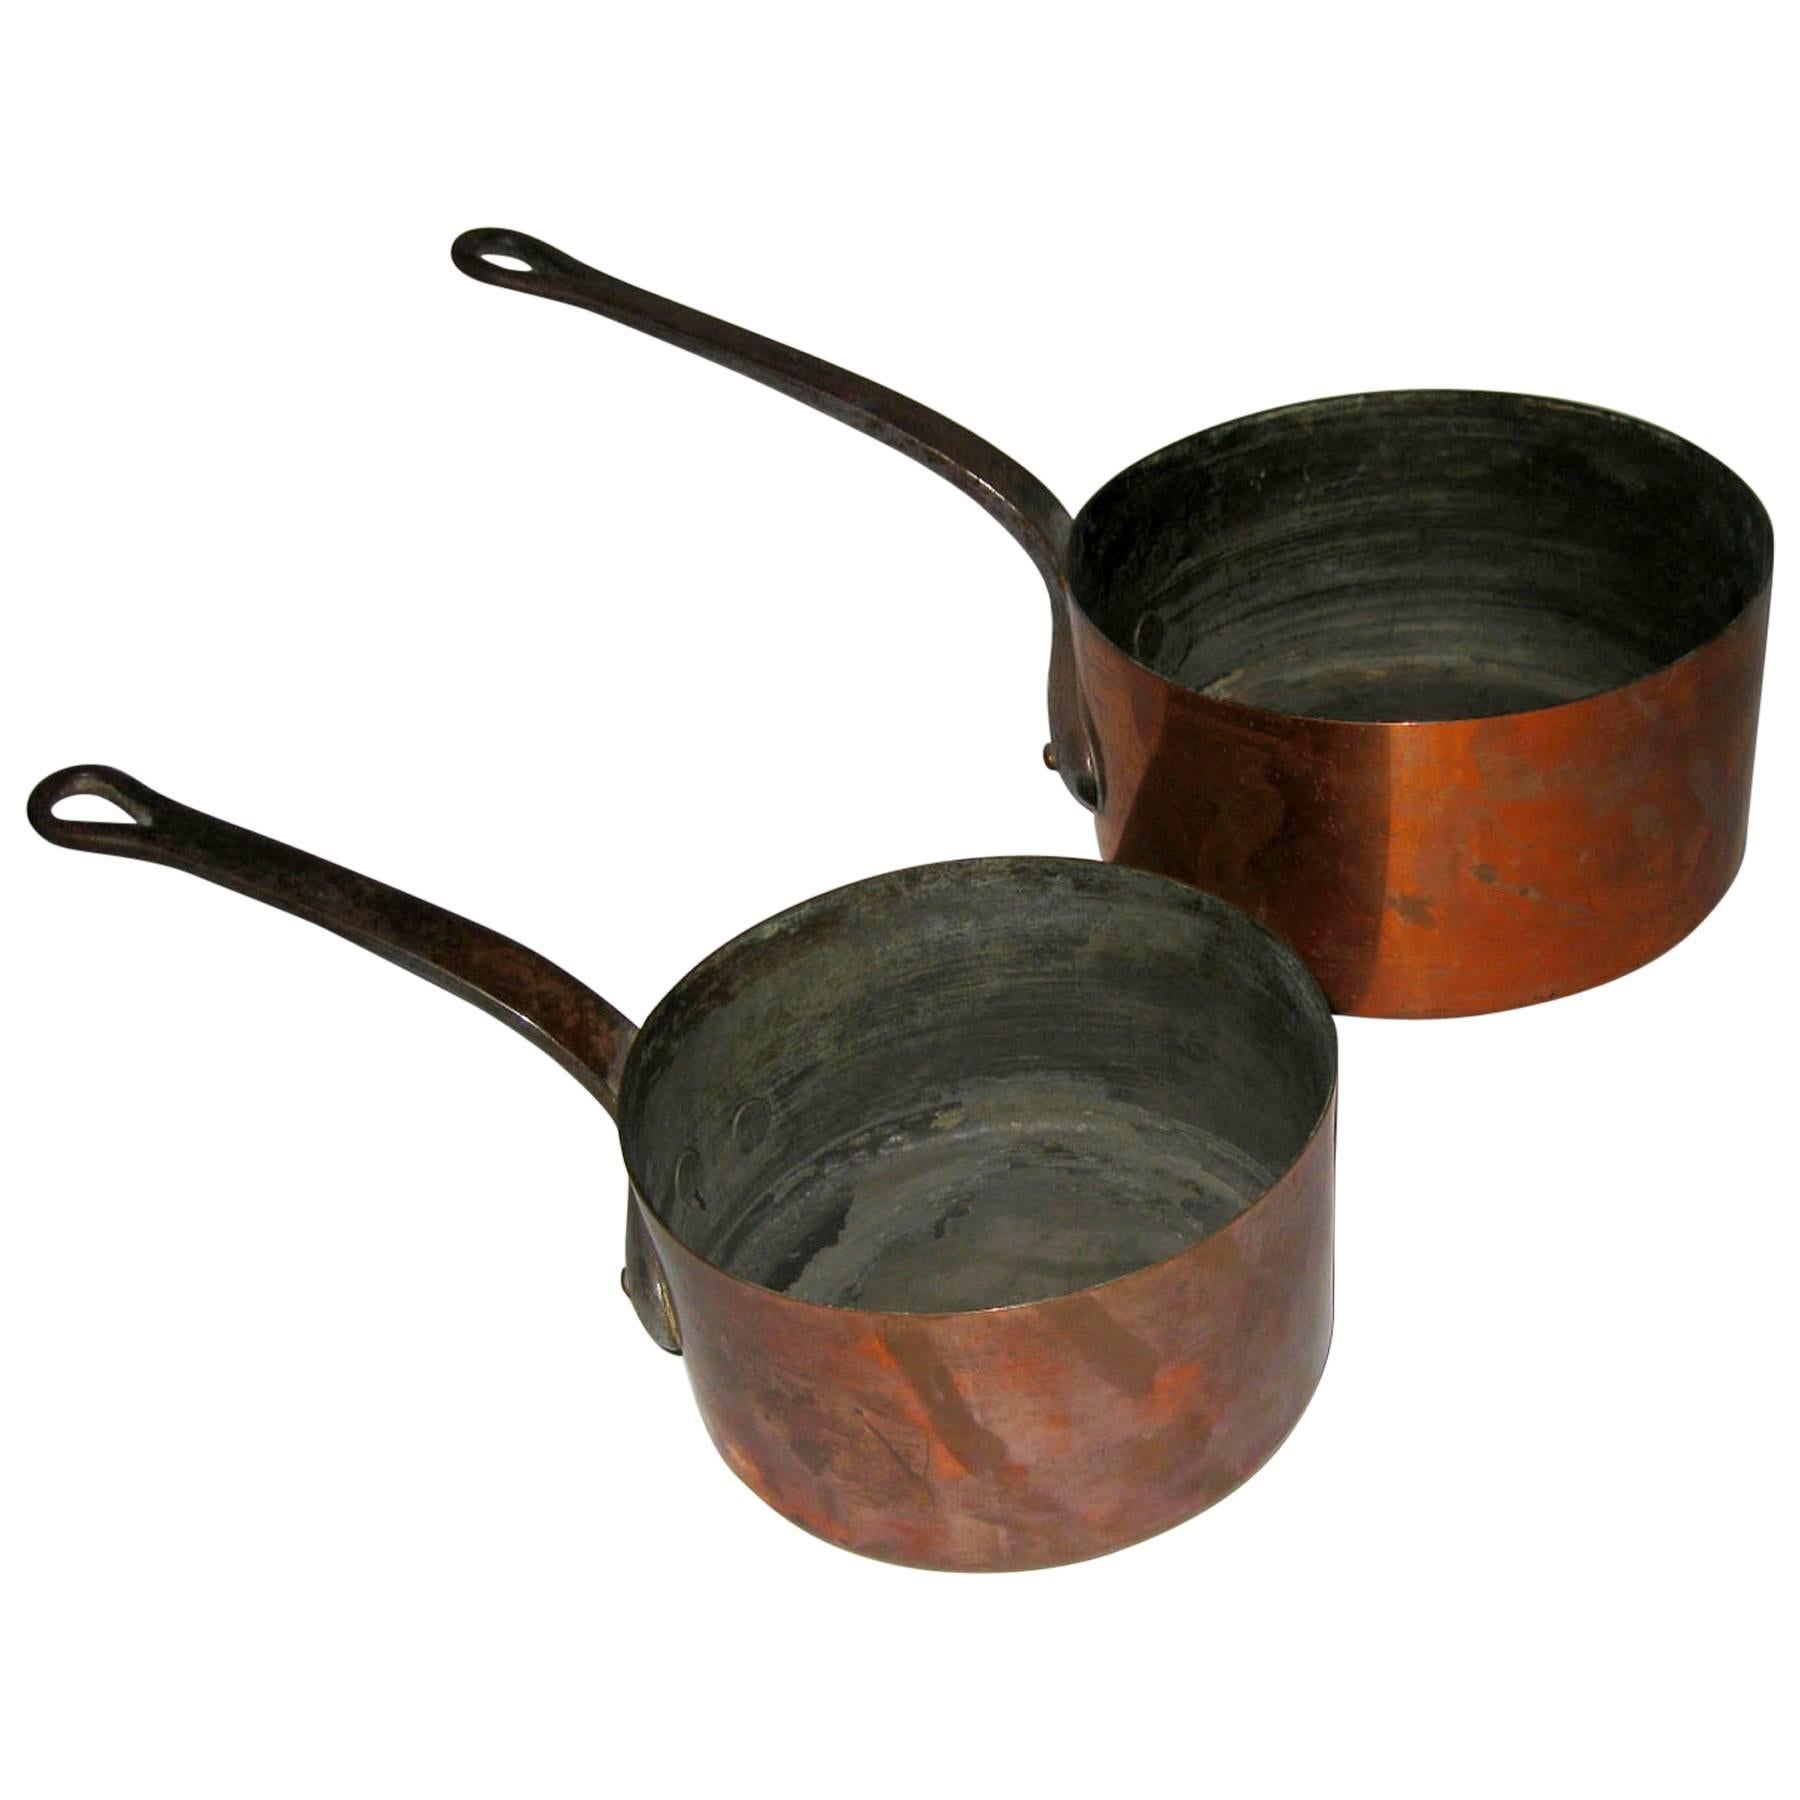 19th century French Copper Cookware